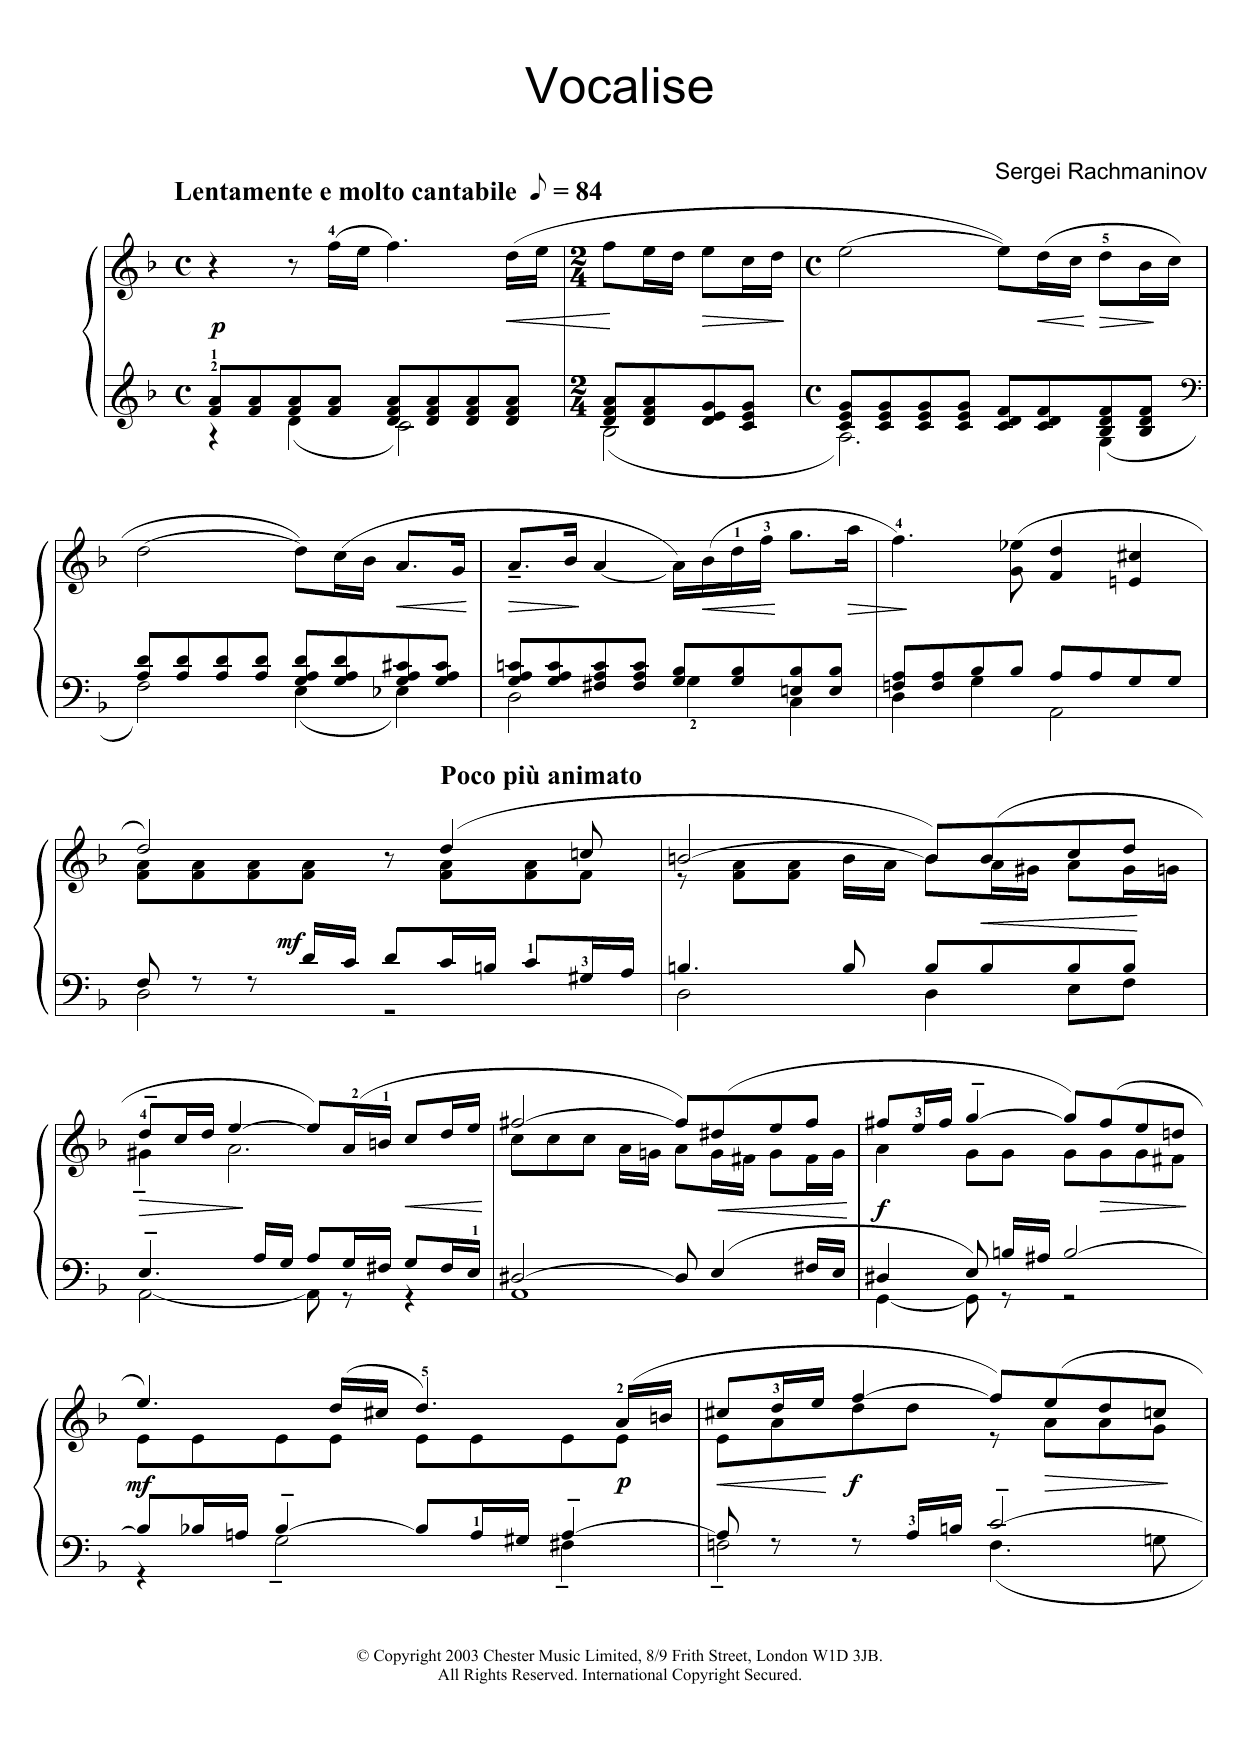 Sergei Rachmaninoff Vocalise sheet music notes and chords. Download Printable PDF.